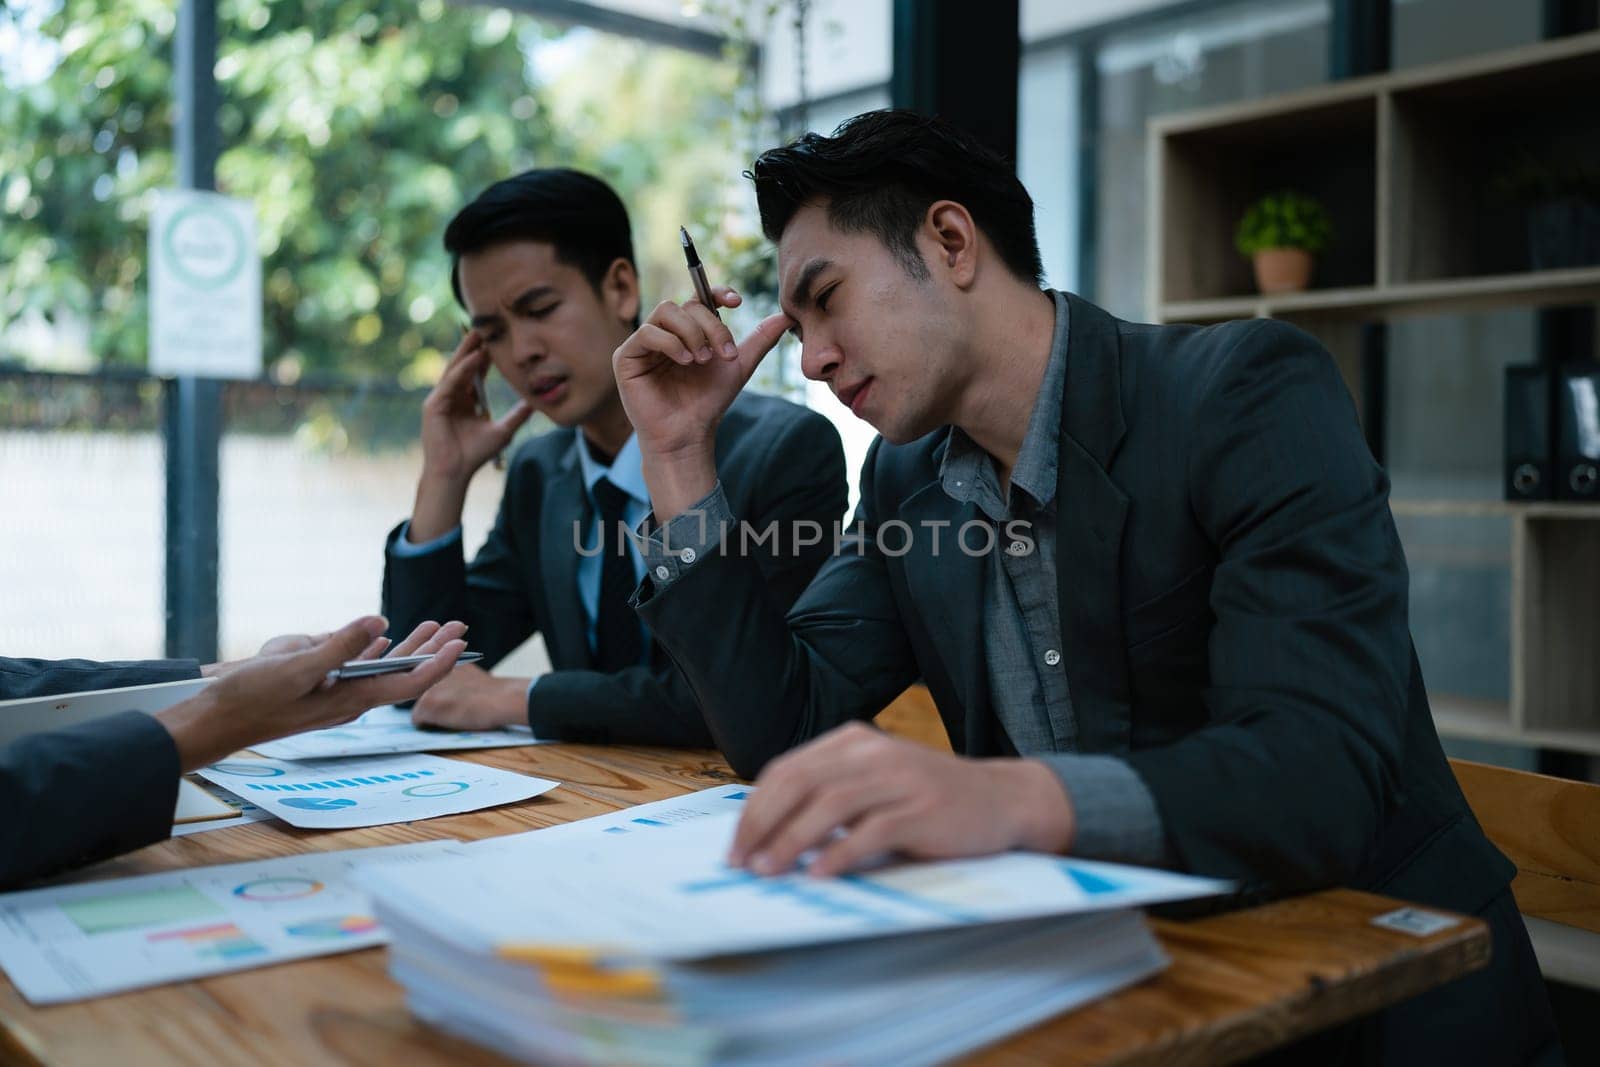 Burnout, stress and business man overworked from too much, work overload and pressure marketing corporate company. Time management, frustrated and tired employee